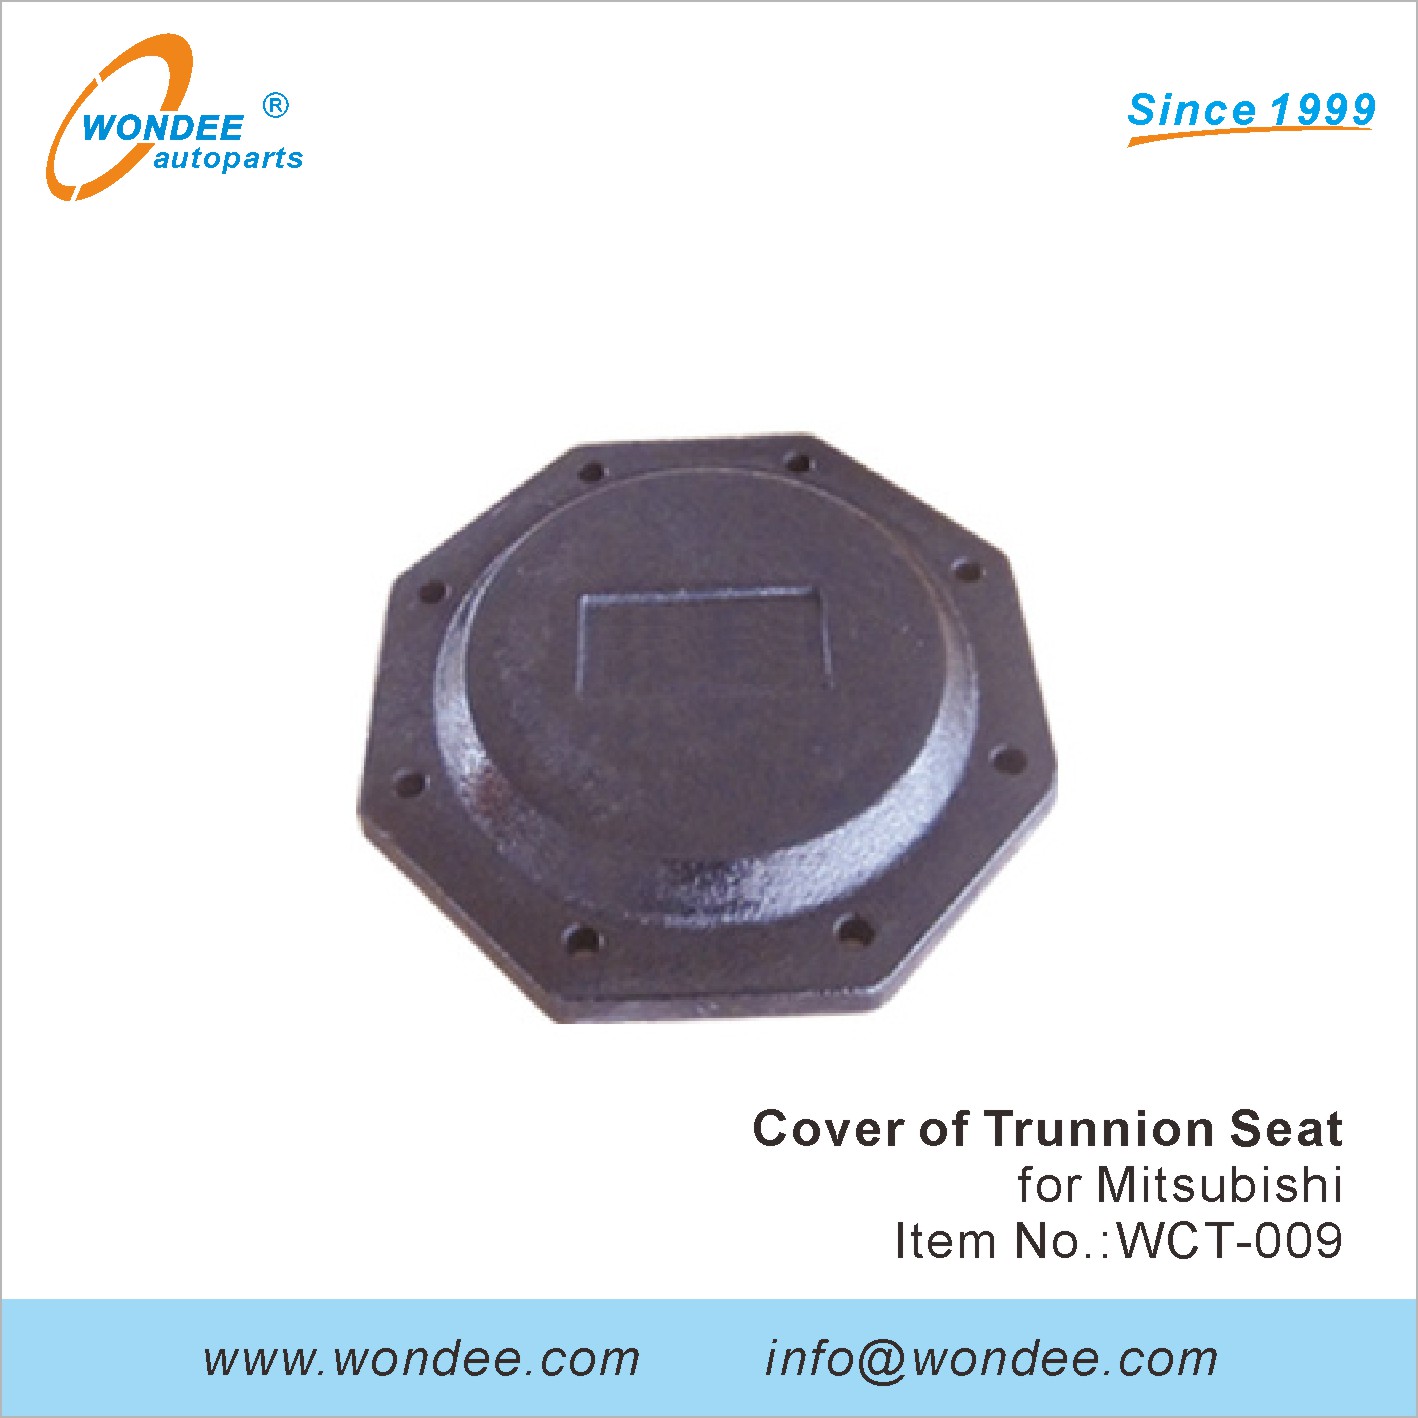 WONDEE cover of trunnion seat (9)